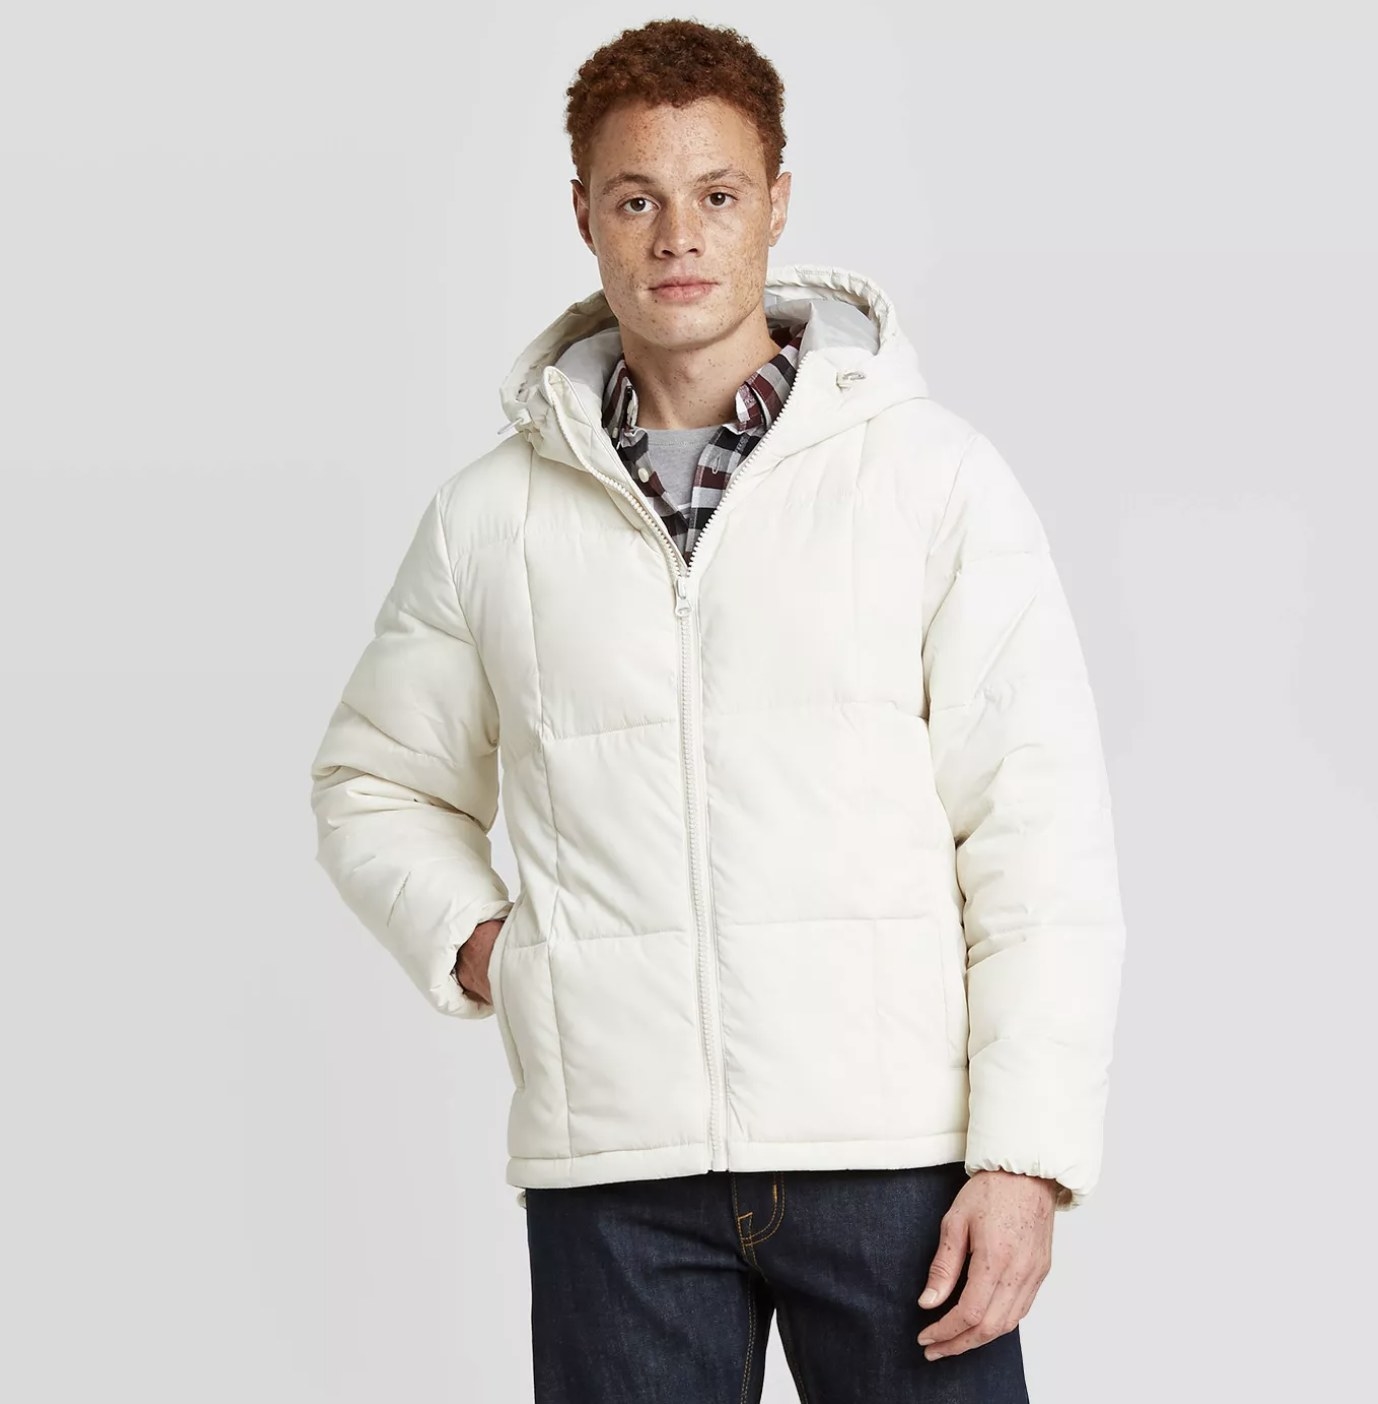 Model is wearing a white hooded puffer jacket and dark denim jeans